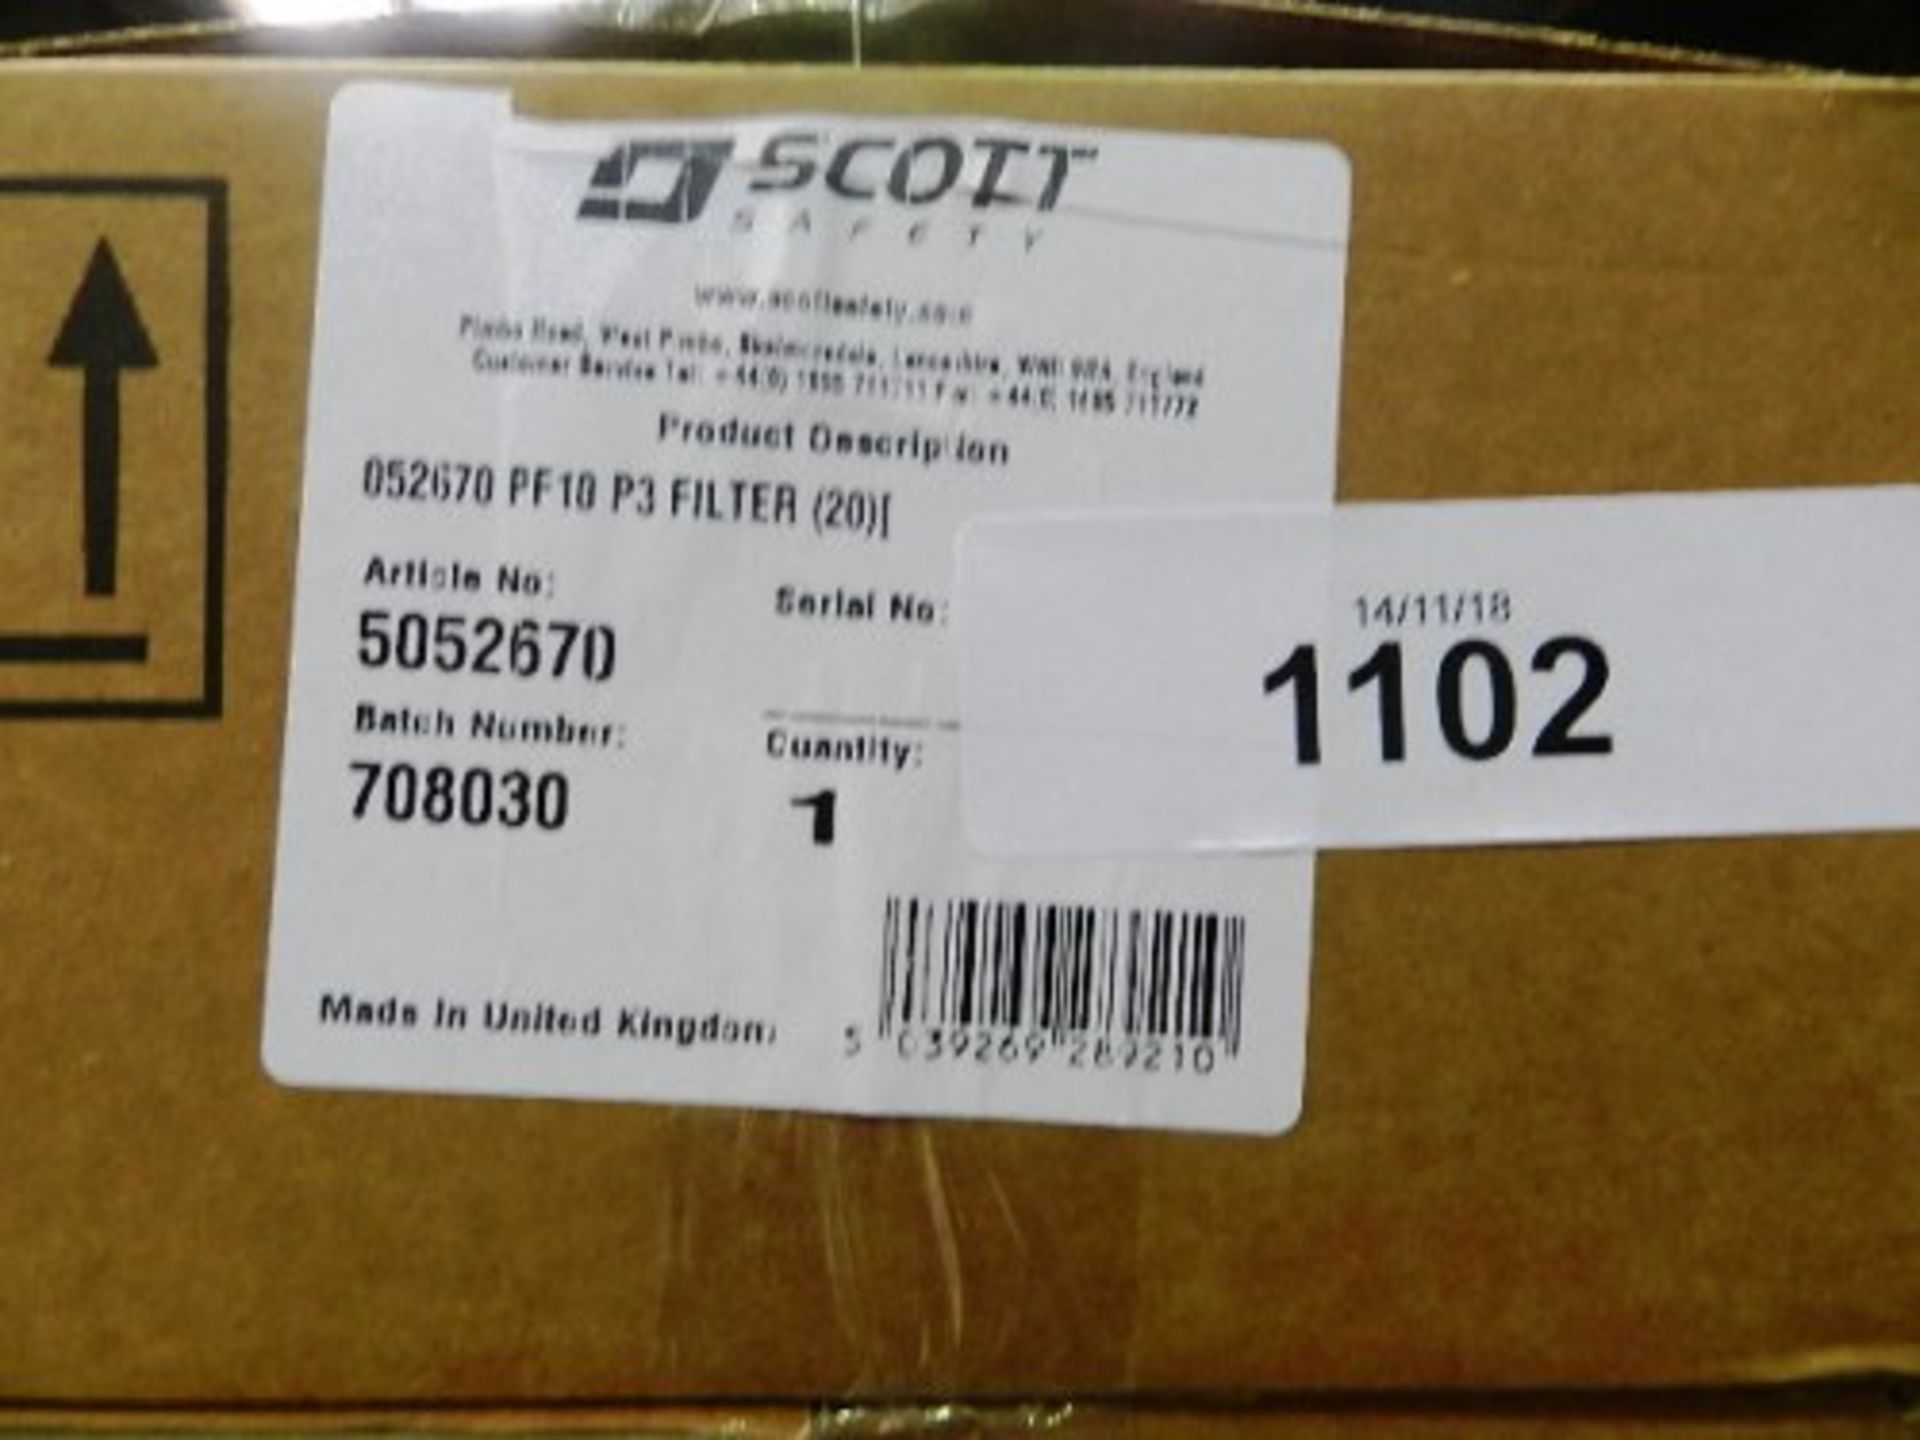 A box containing 20 x Scott safety 5052670 PF-10 P3 filters - New in box (ESB21)